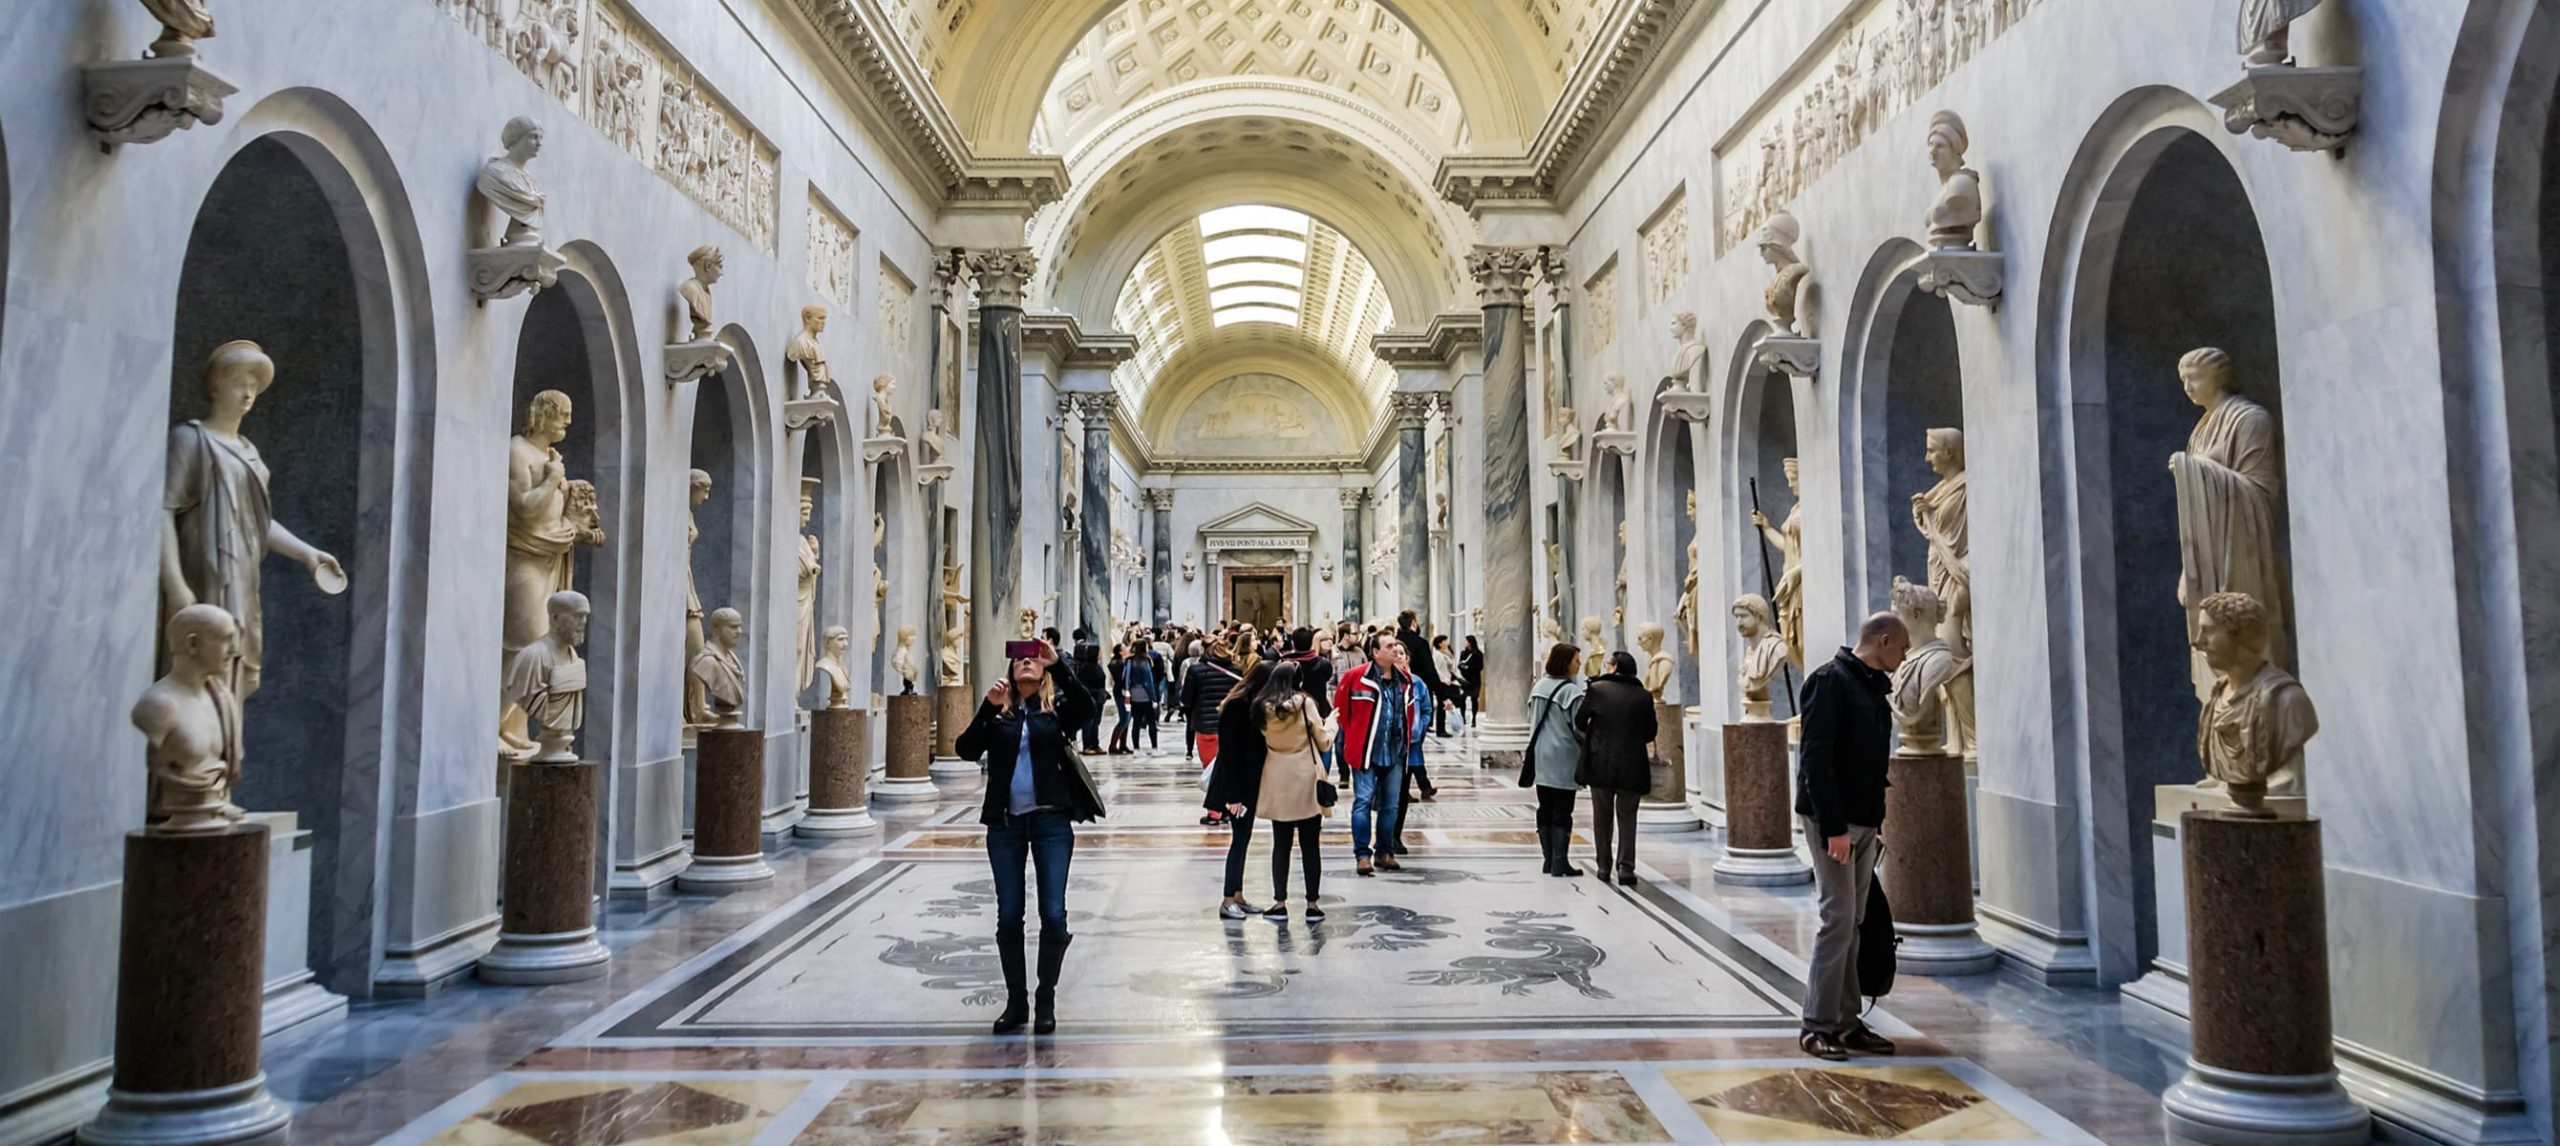 The 9 Best Museums in Rome, Italy